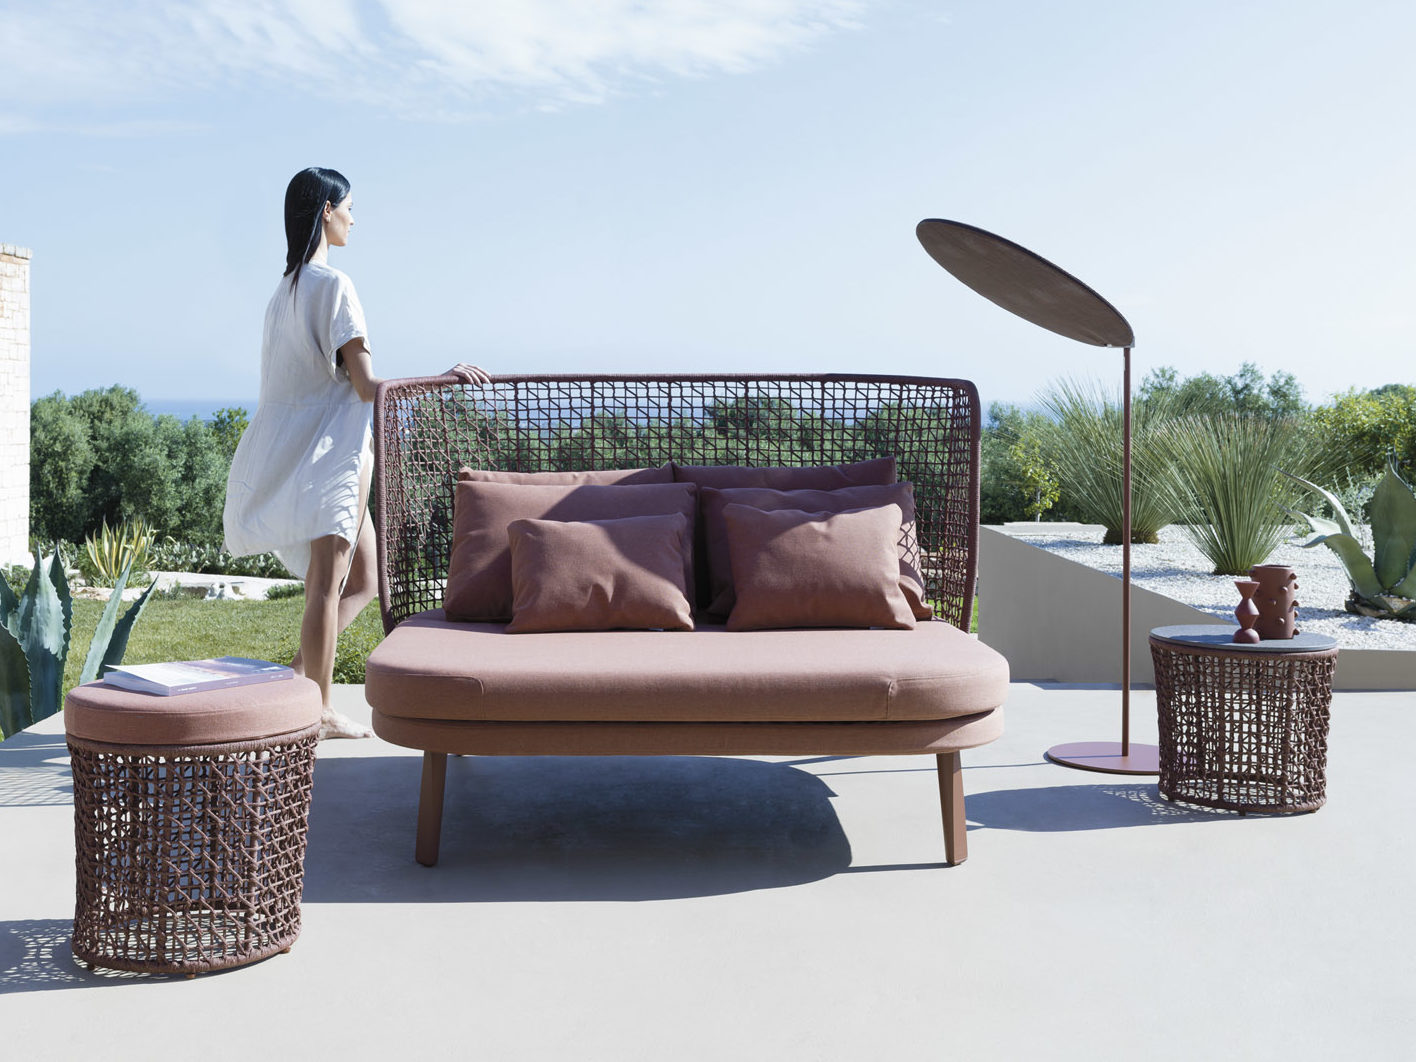 Enhance your outdoor experience: Discover Varaschin Outdoor furniture at Iconic Design